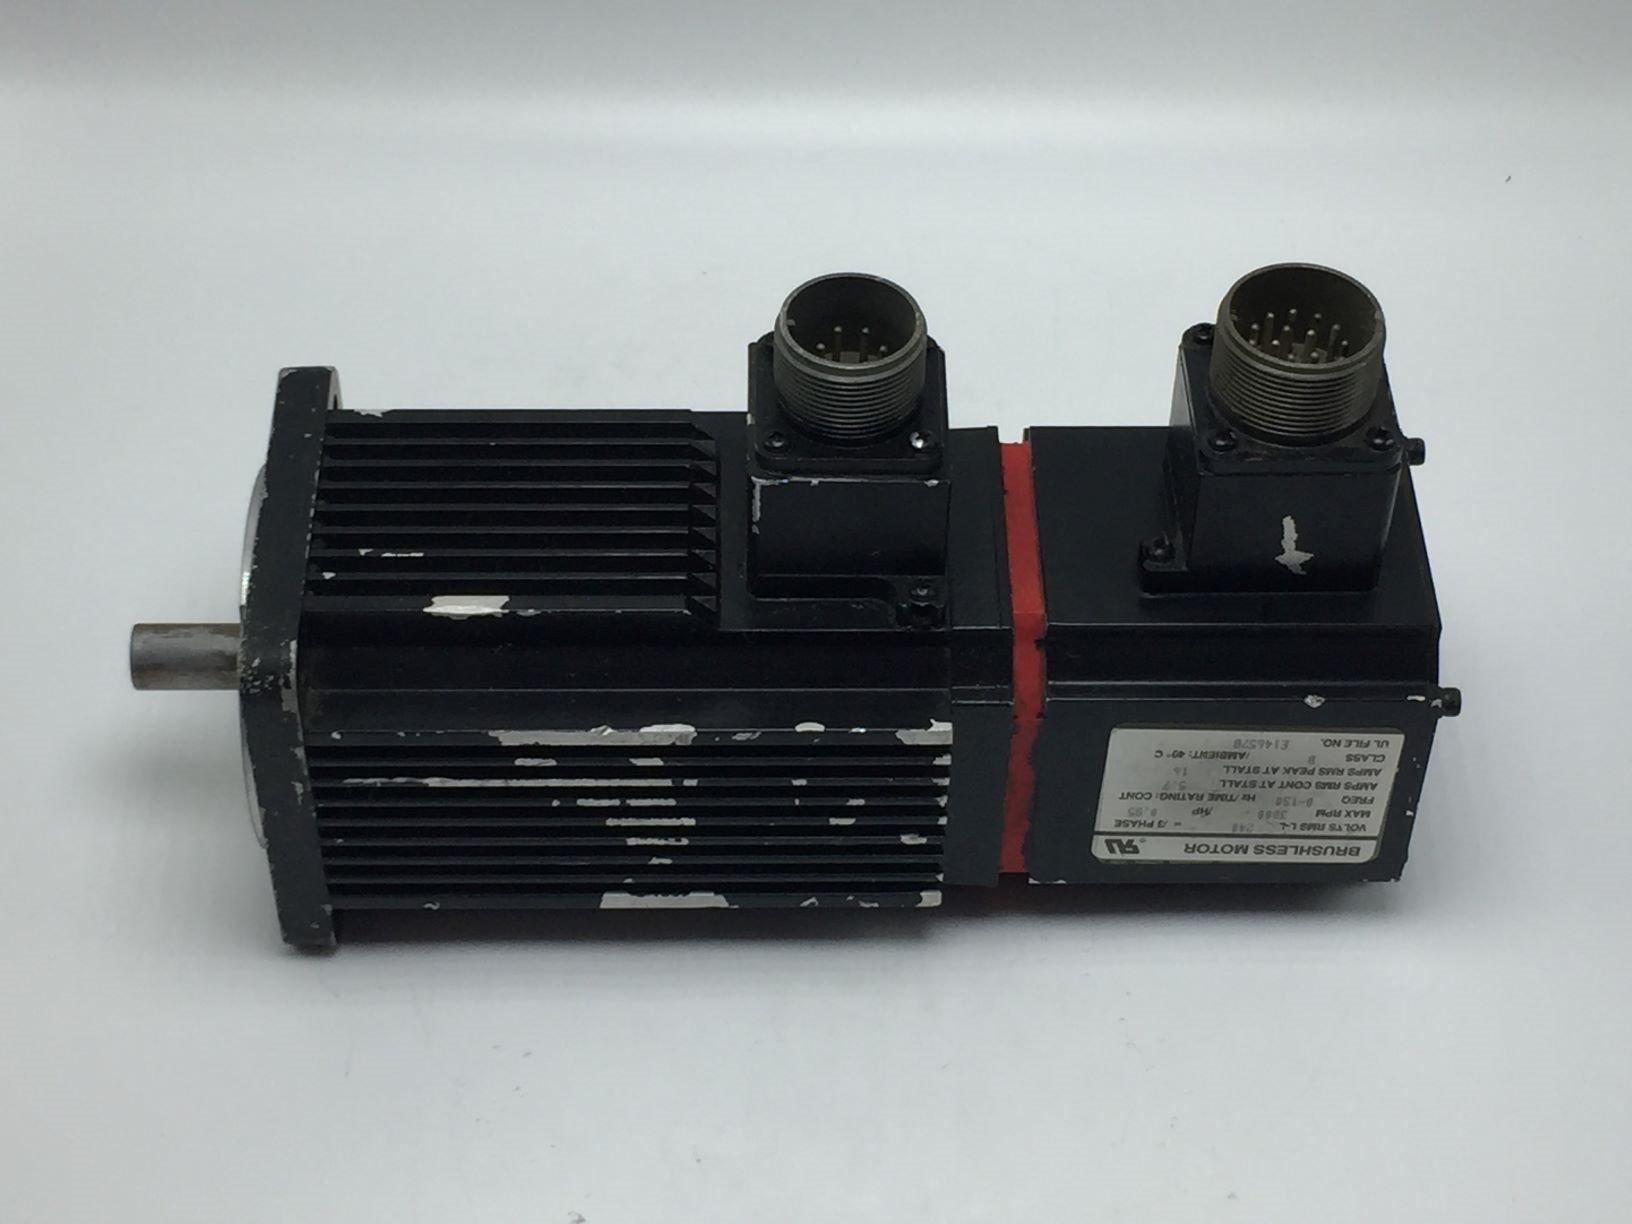  RELIANCE ELECTRIC S-3016-N-00AD SERVO MOTOR 3000RPM TESTED 